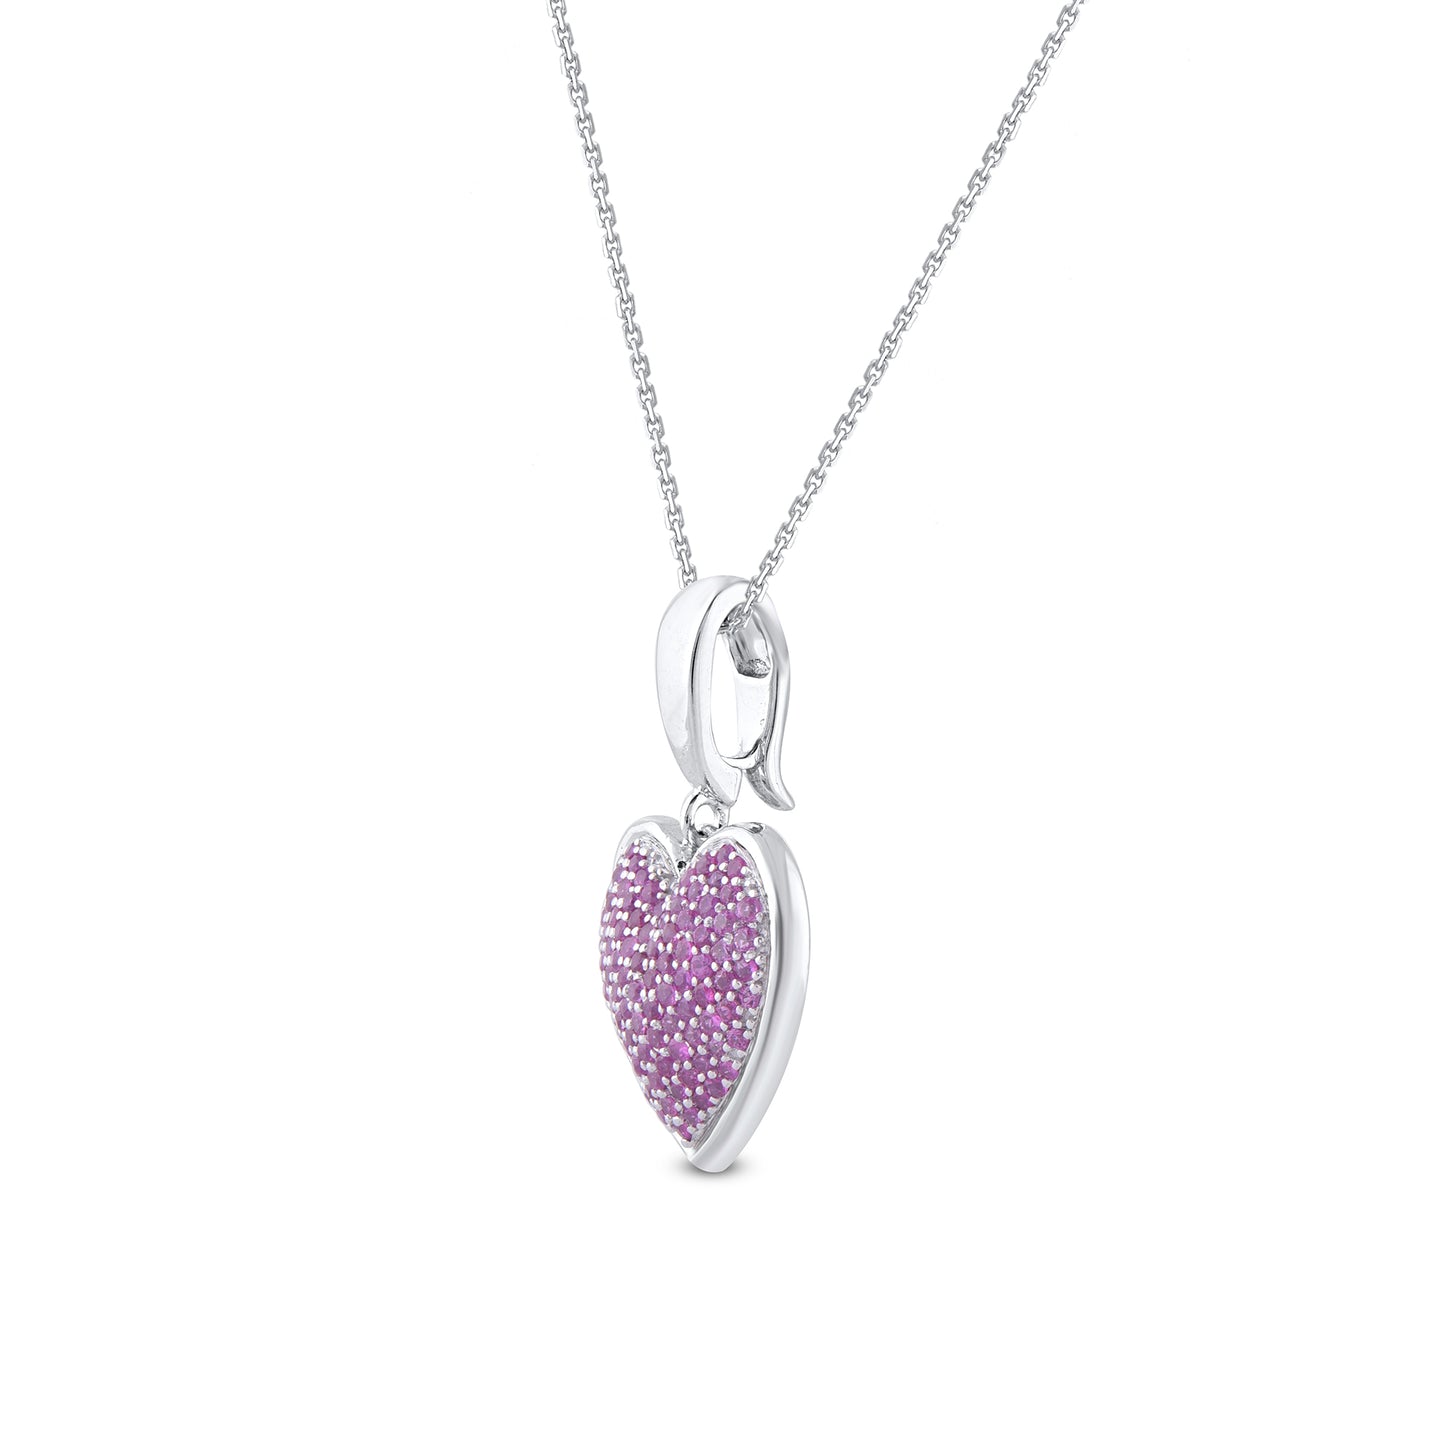 Pink Sapphire Heart Pendant Necklace in 925 Sterling Silver